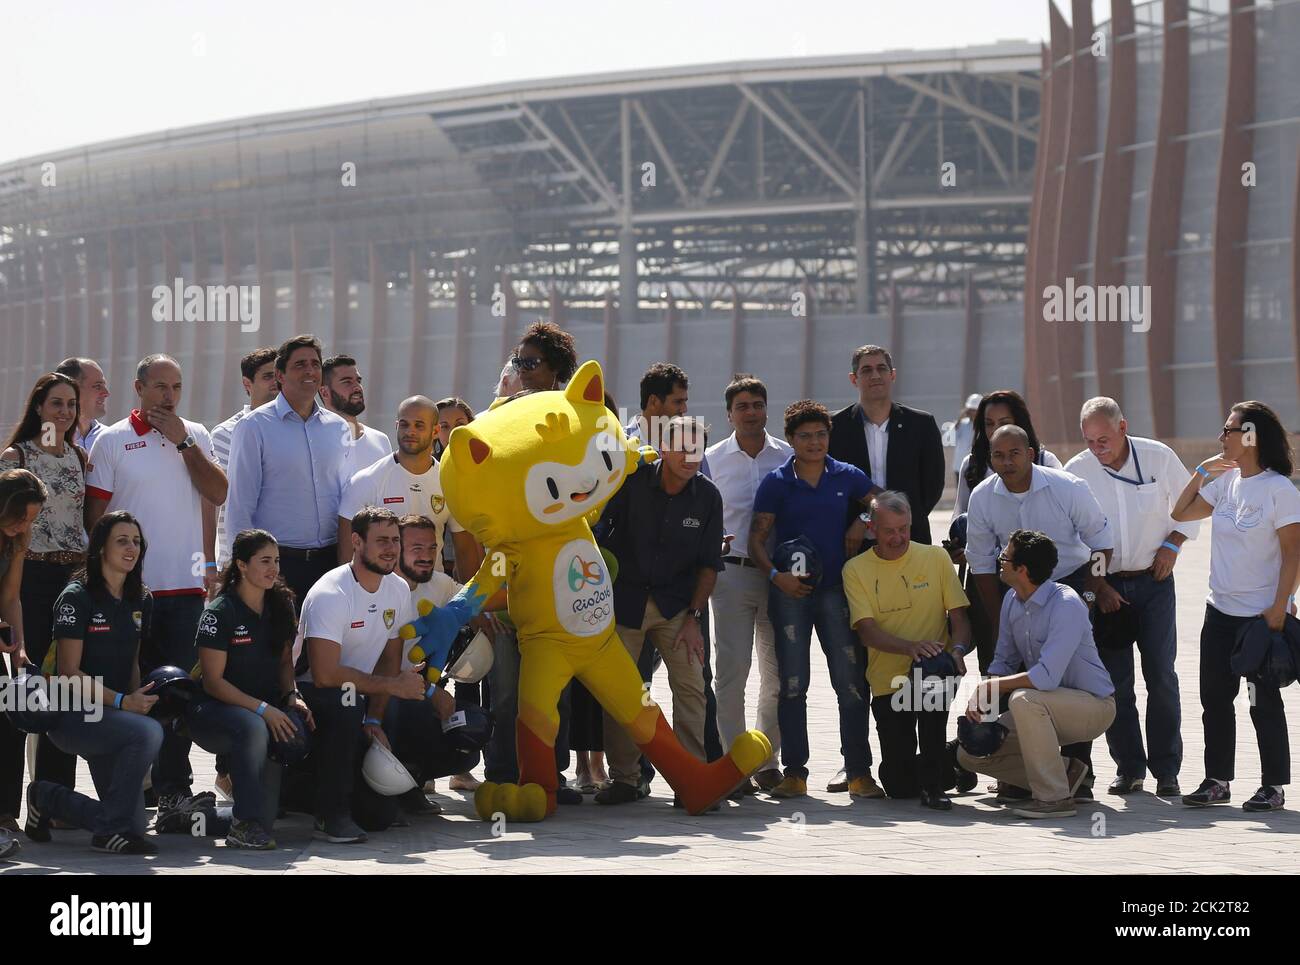 Rio de Janeiro mayor Eduardo Paes (C) poses for pictures next to the Rio 2016 Olympic mascot Vinicius and current and former Brazilian Olympians at the Olympic Park in Rio de Janeiro, Brazil, August 5, 2015. Rio de Janeiro started the one year countdown to host the Rio 2016 Olympic Games on Wednesday. REUTERS/Sergio Moraes Stock Photo